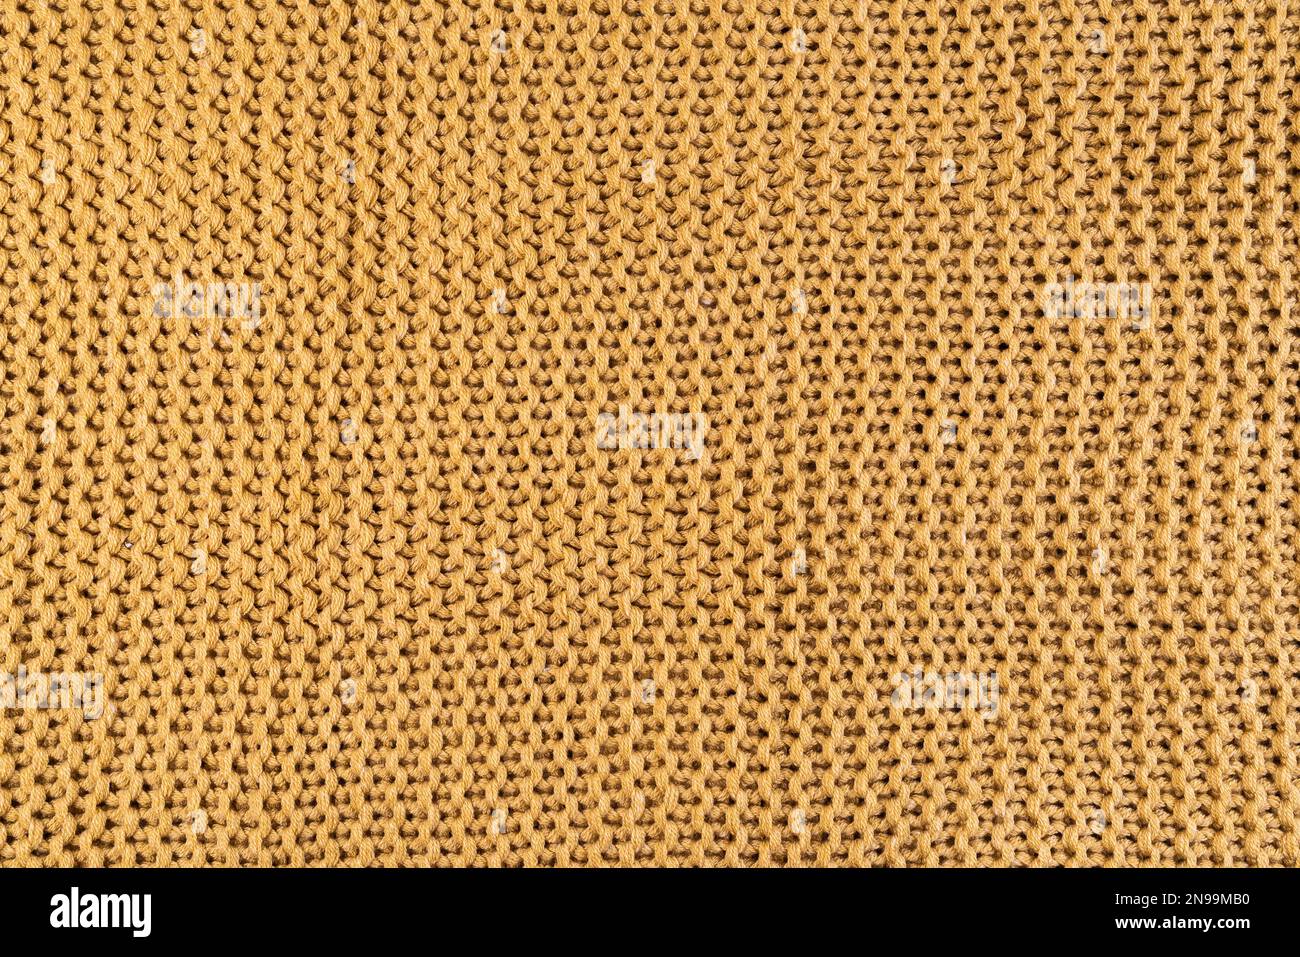 close-up of gold colored knitted fabric, textile background Stock Photo